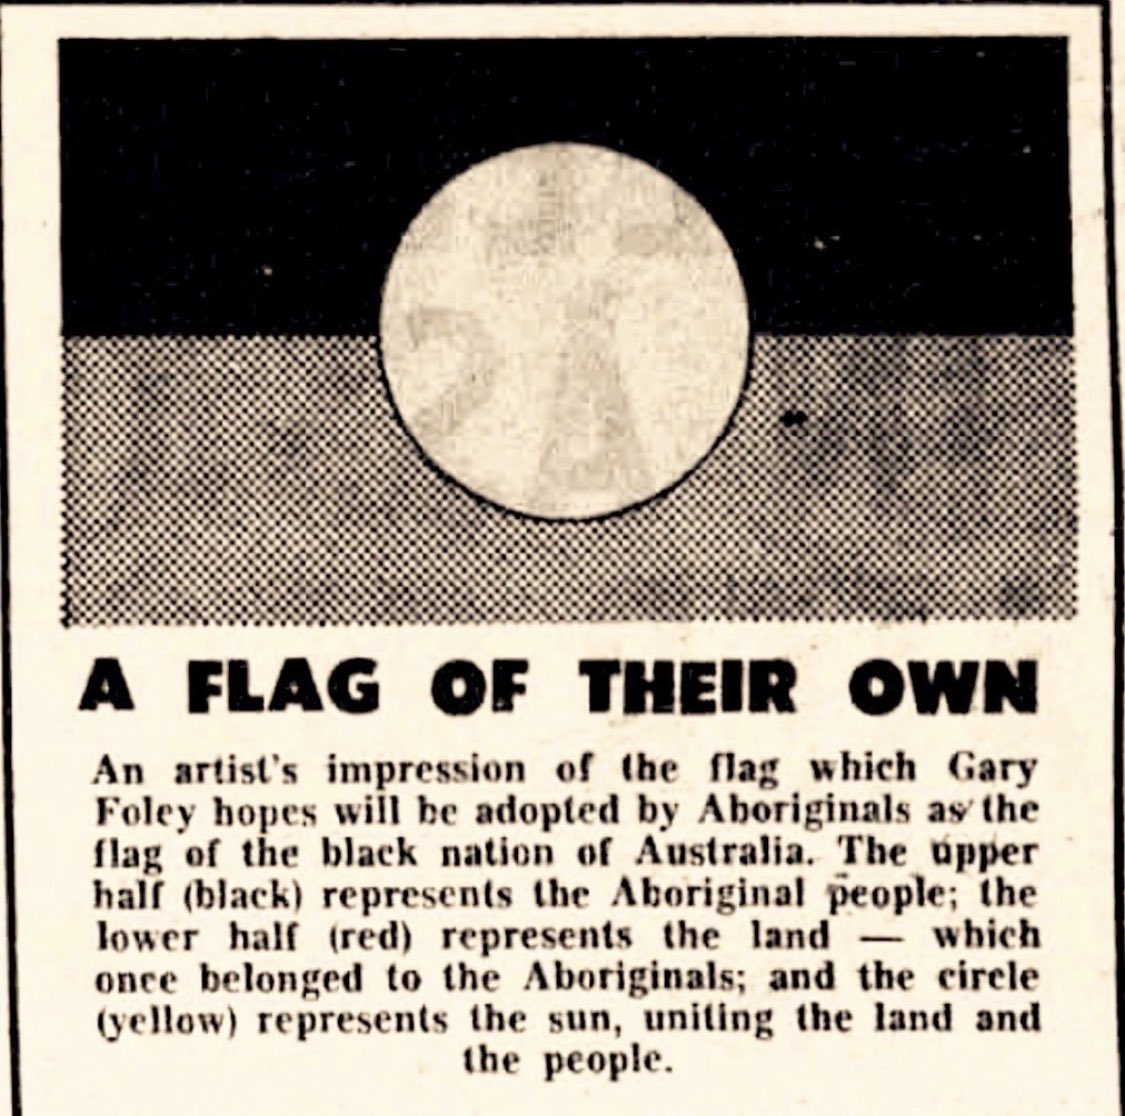 5) In 1972 Aboriginal activist Gary Foley took the flag to the Aboriginal tent embassy where the flag was adopted and accepted.